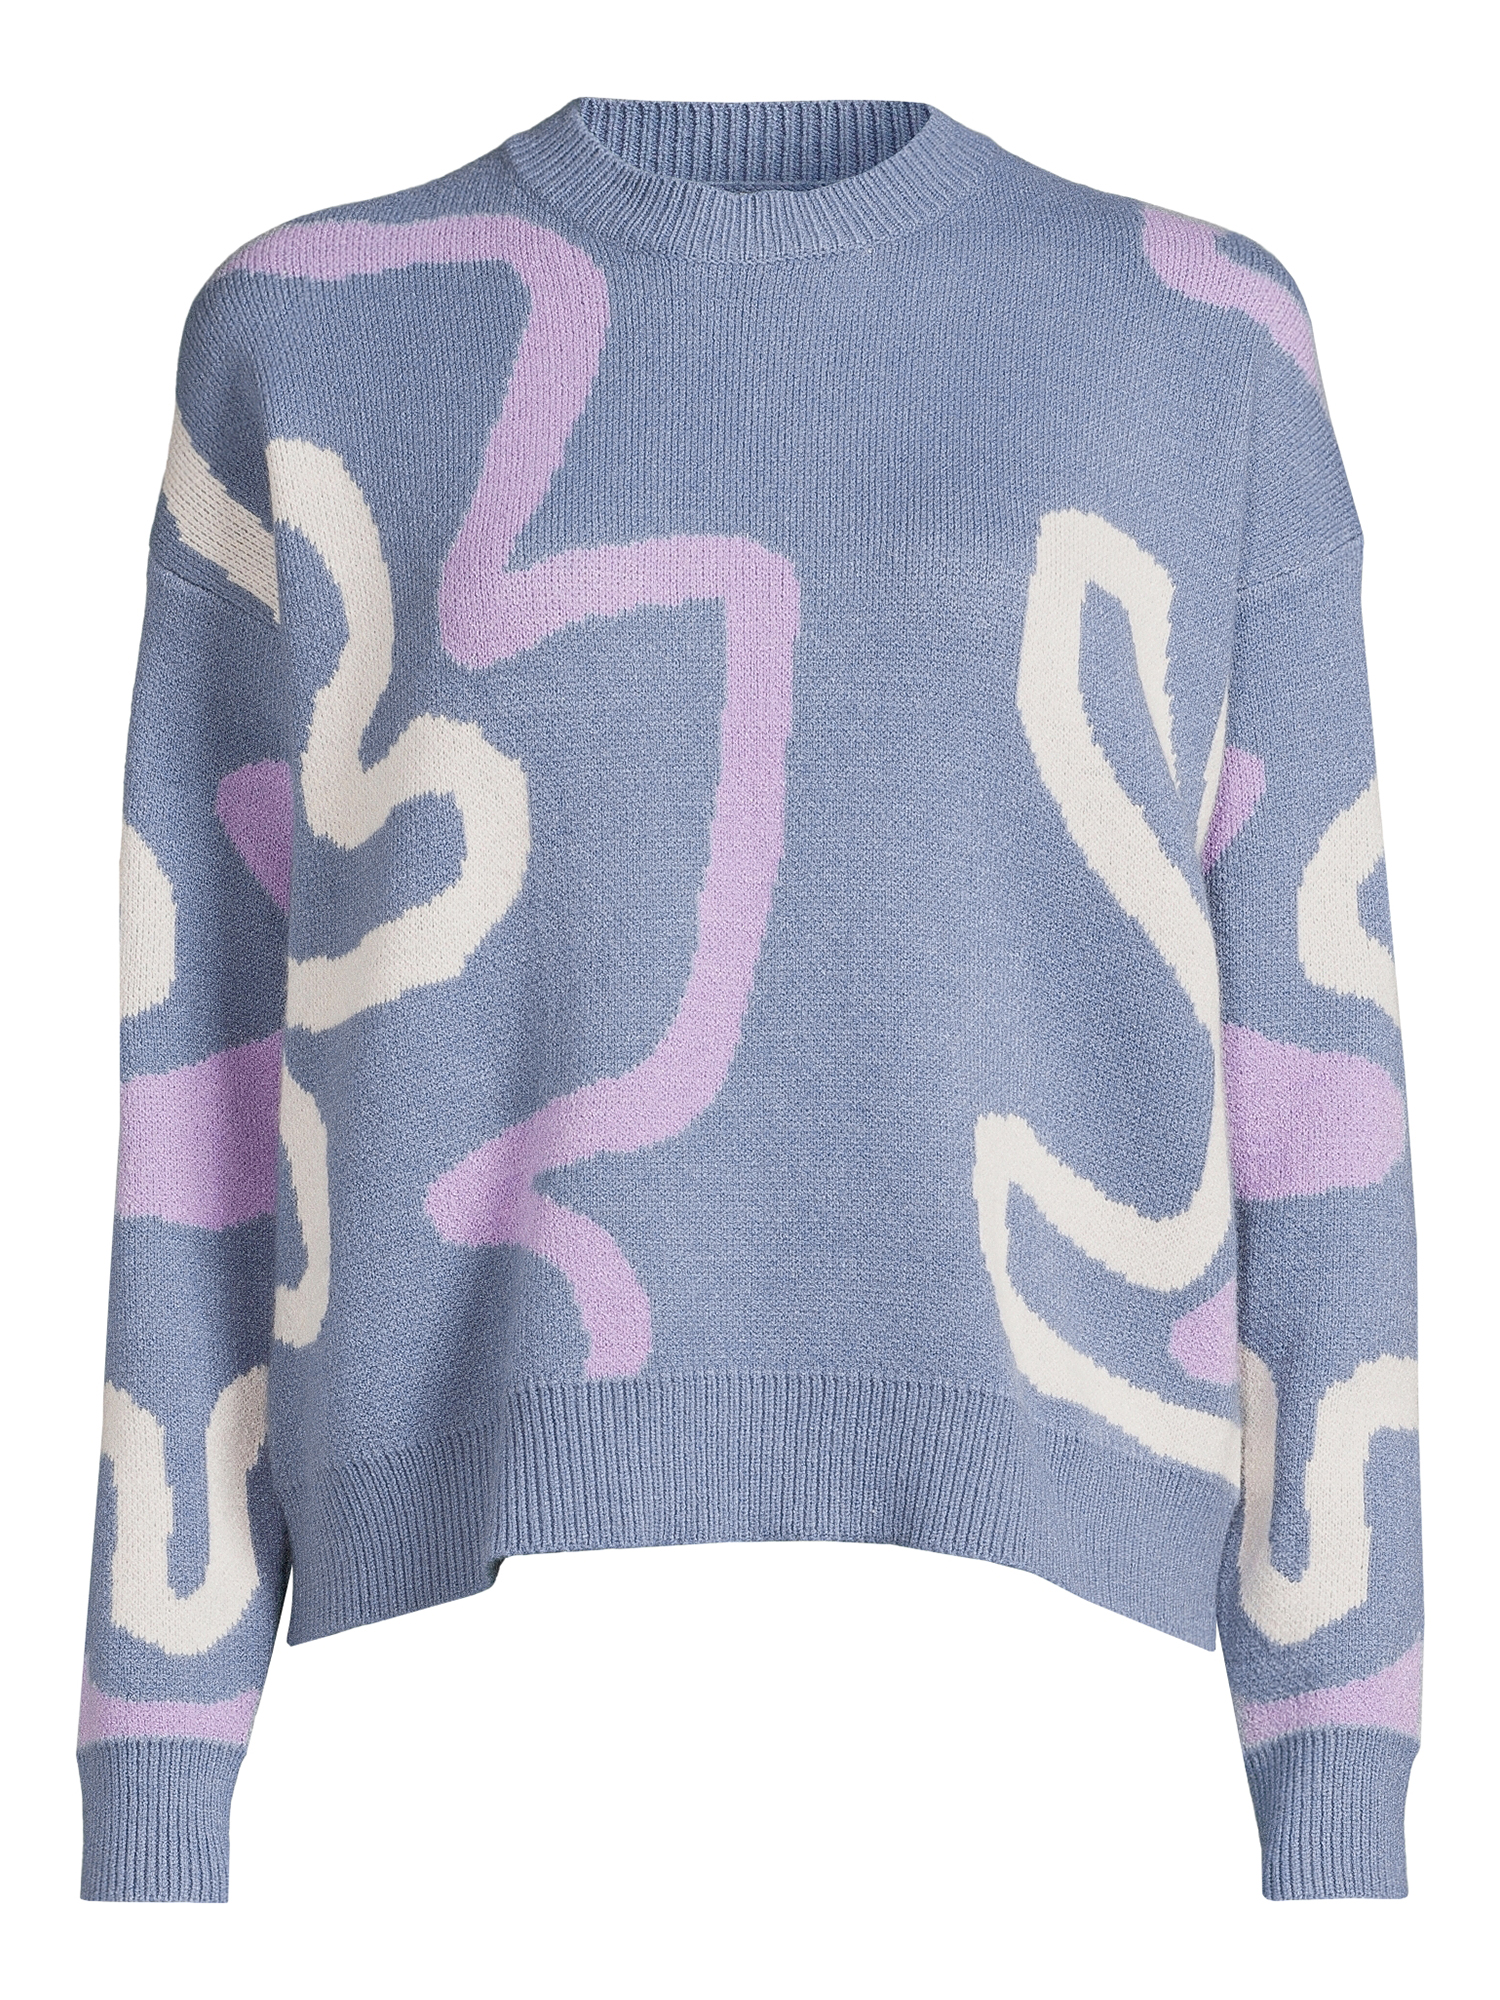 Dreamers by Debut Womens Print Pullover Long Sleeve Sweater - image 5 of 5